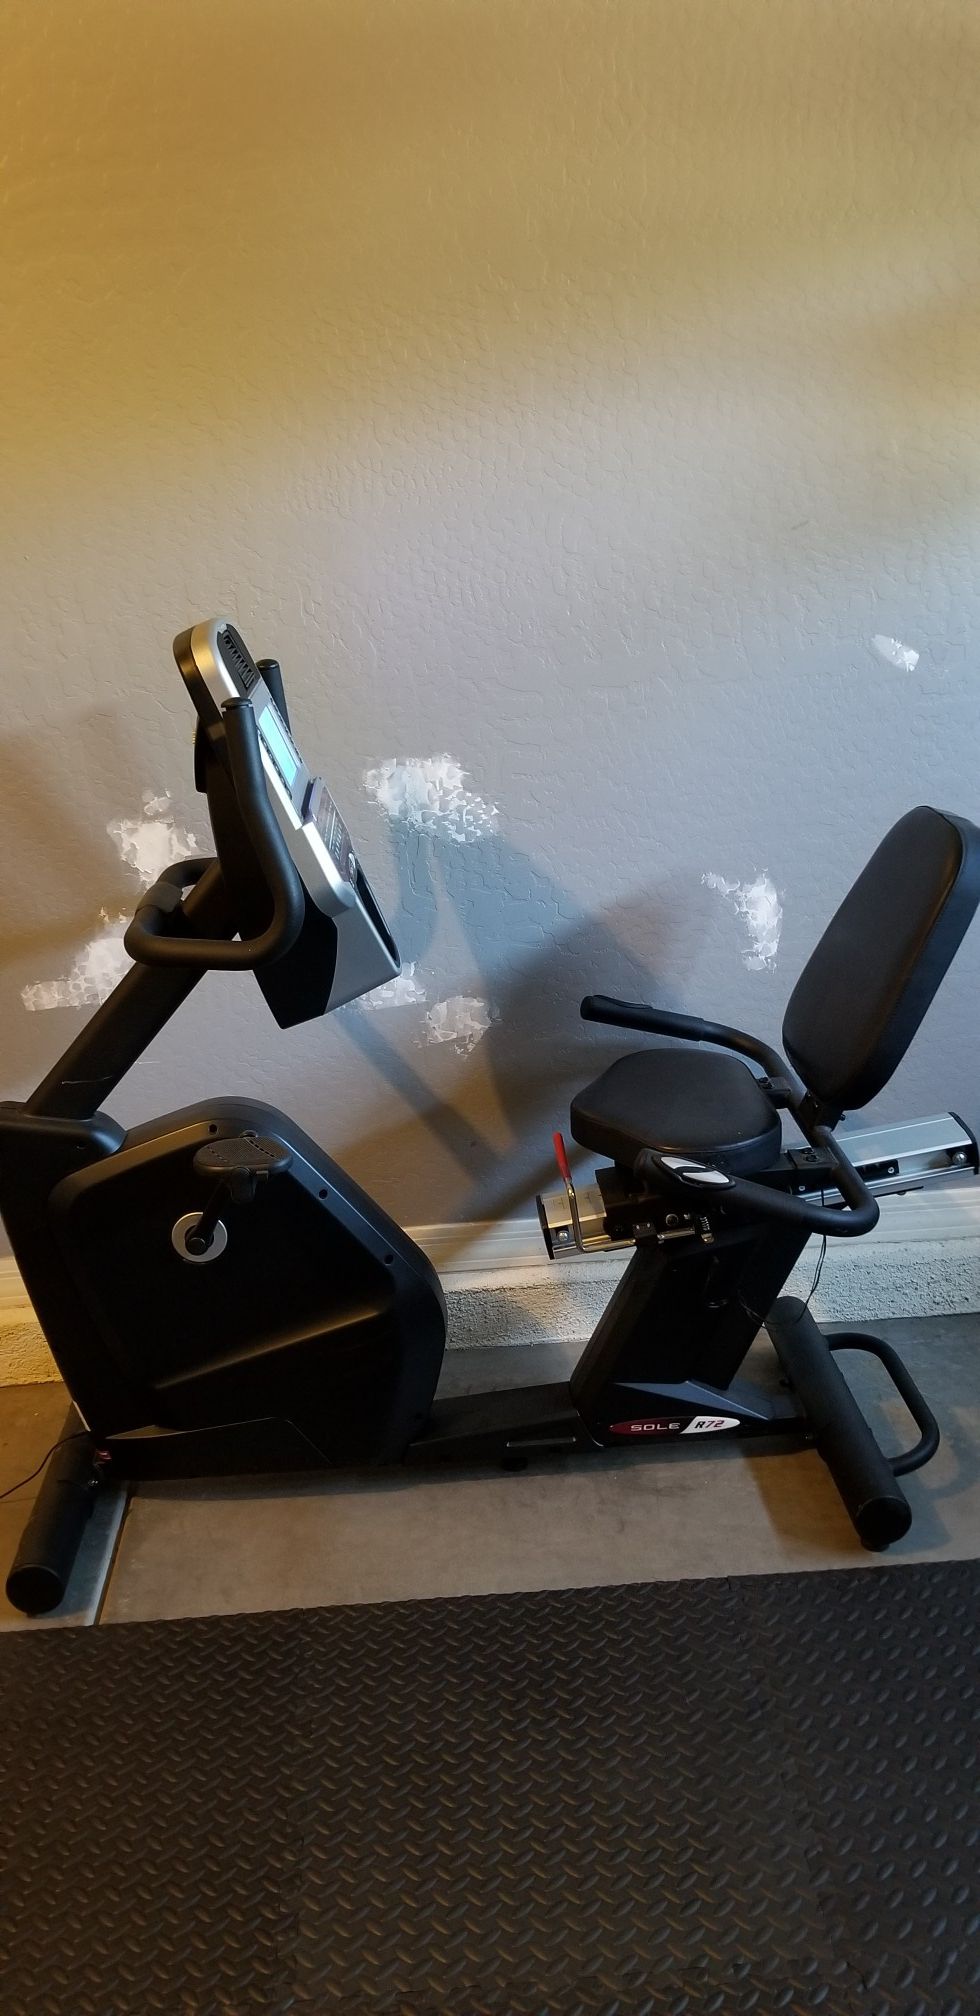 Sole R72 exercise bike